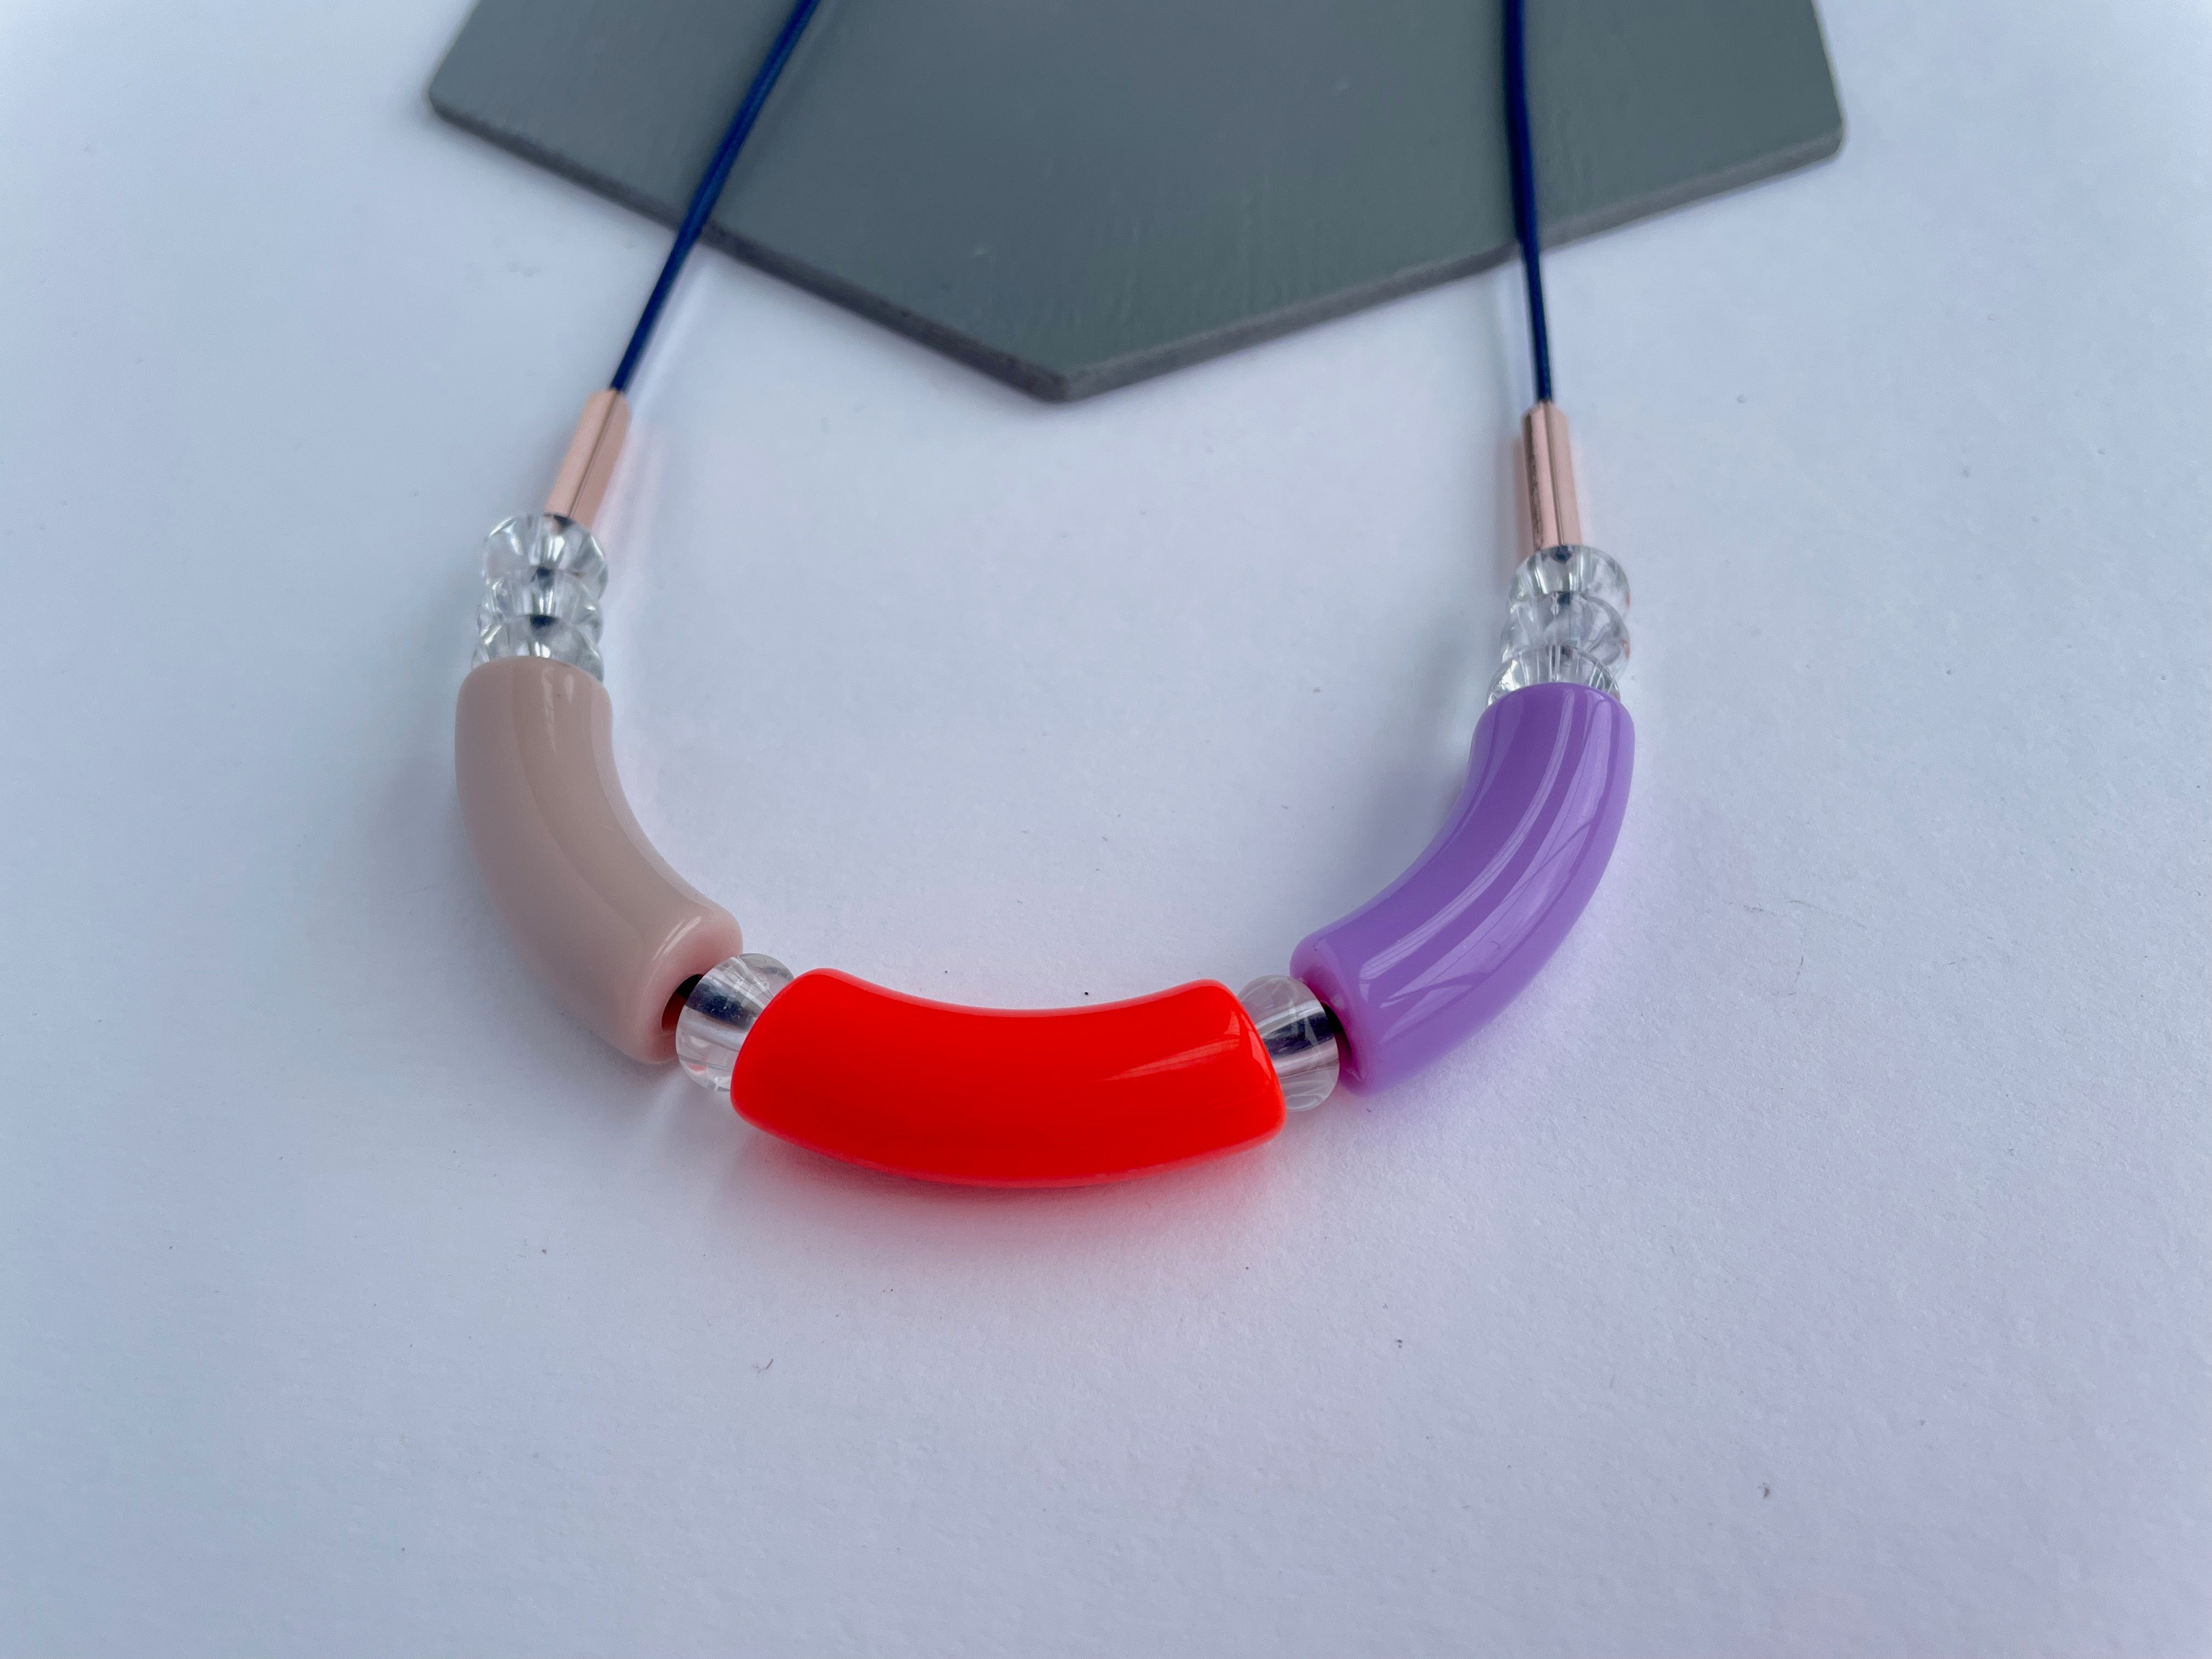 Colour Forme Jewellery Colour Block Necklace in Bright Lilac, Bright Coral Red and Taupe